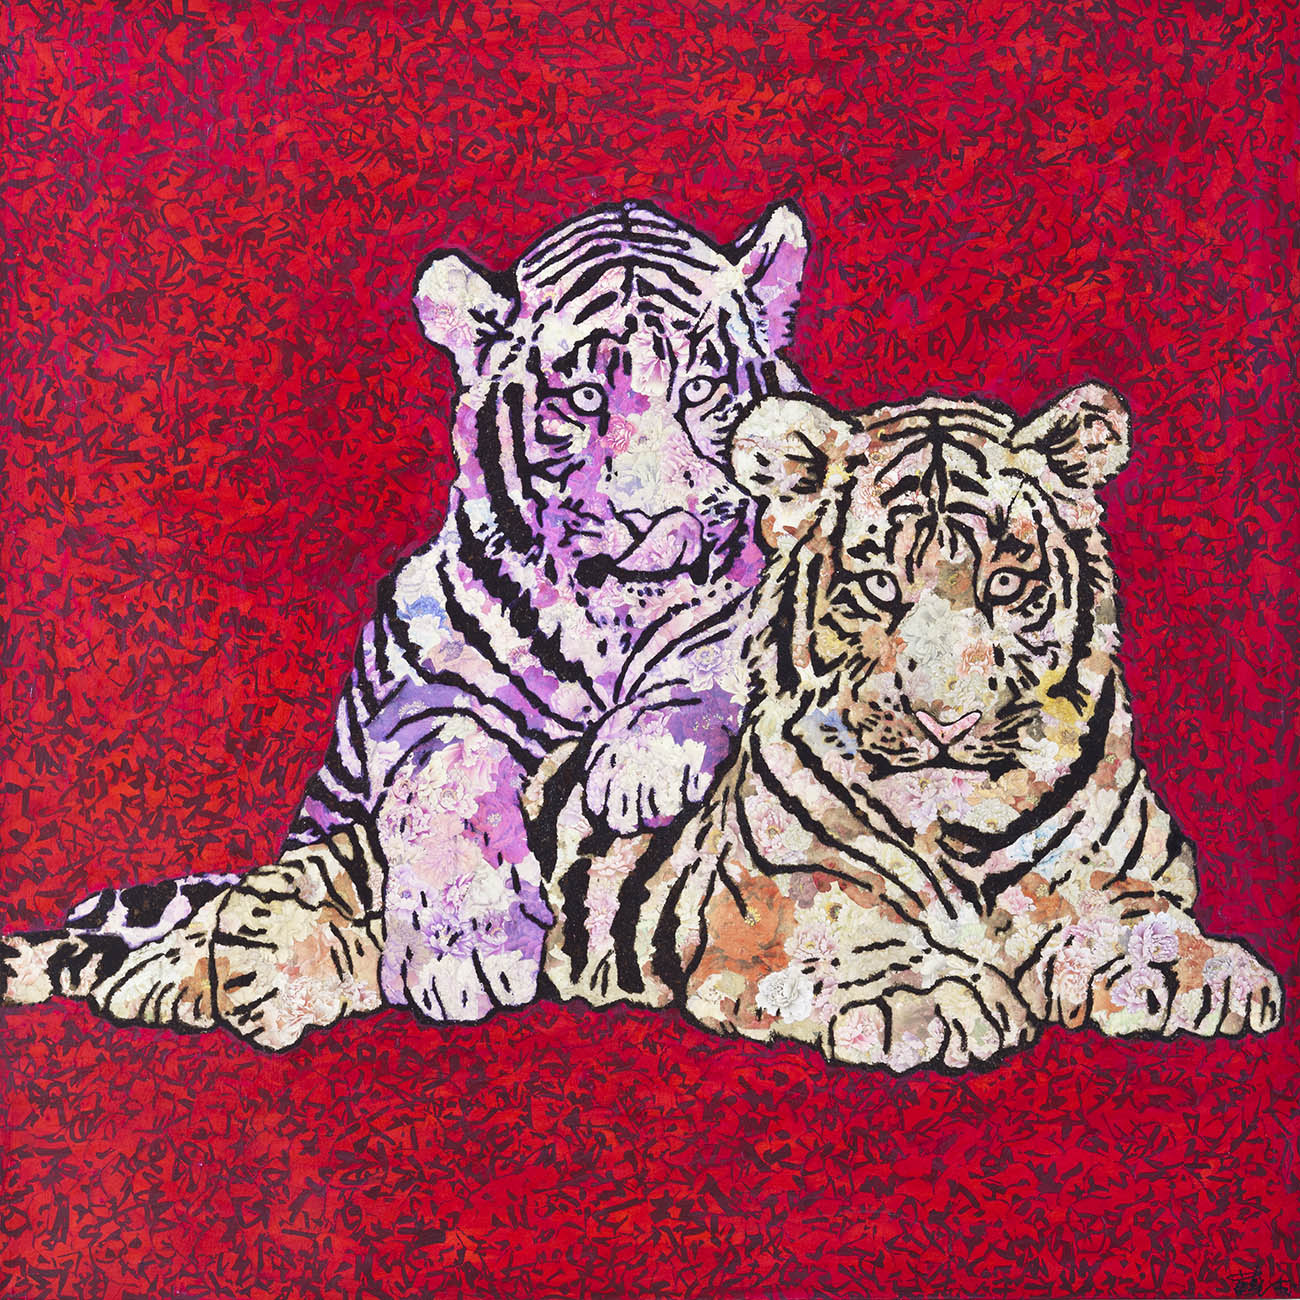 Xue Song, <i>Two Tigers,</i> 2010